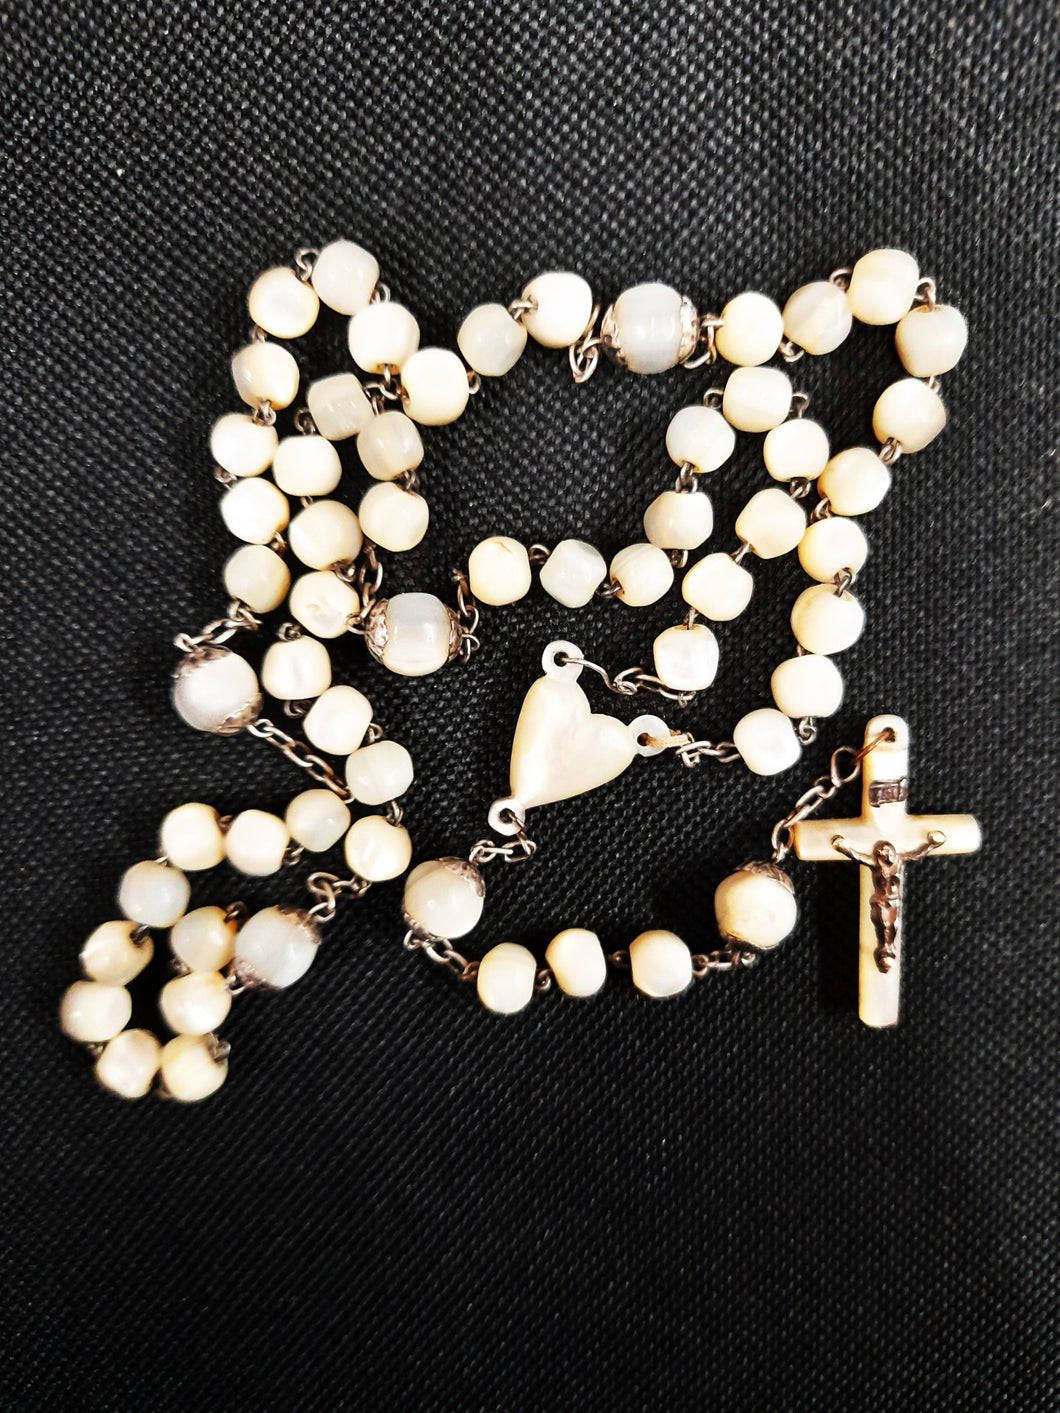 Antique Catholic Rosary, French Rosary, Hand Set Mother of Pearl Beads and Link Heart, Sterling Silver Cross and Chain, Circa 1880